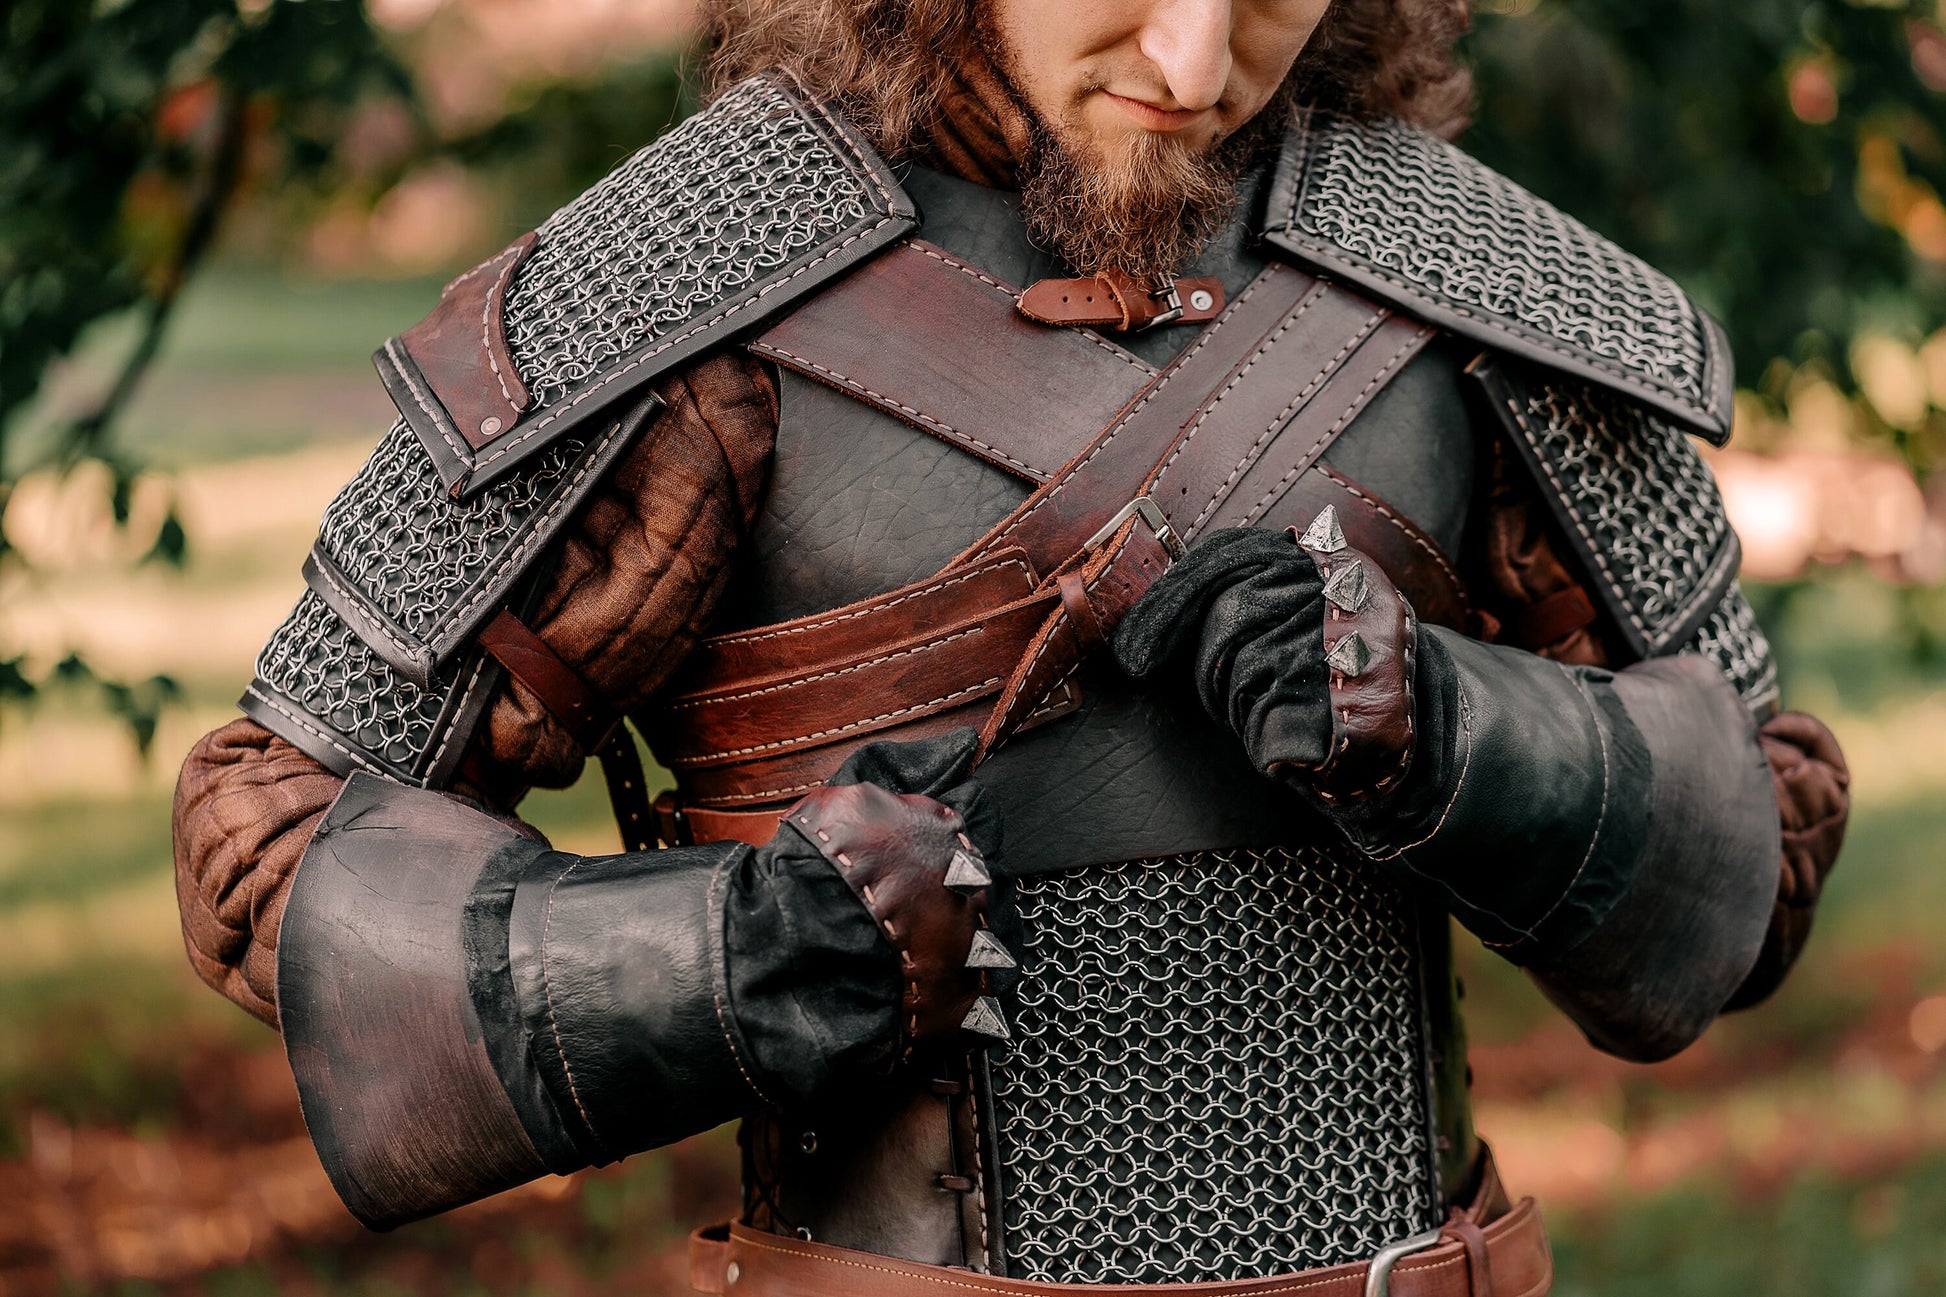 The Witcher Geralt of Rivia Cosplay Costume Brown Leather & Chainmail Armour